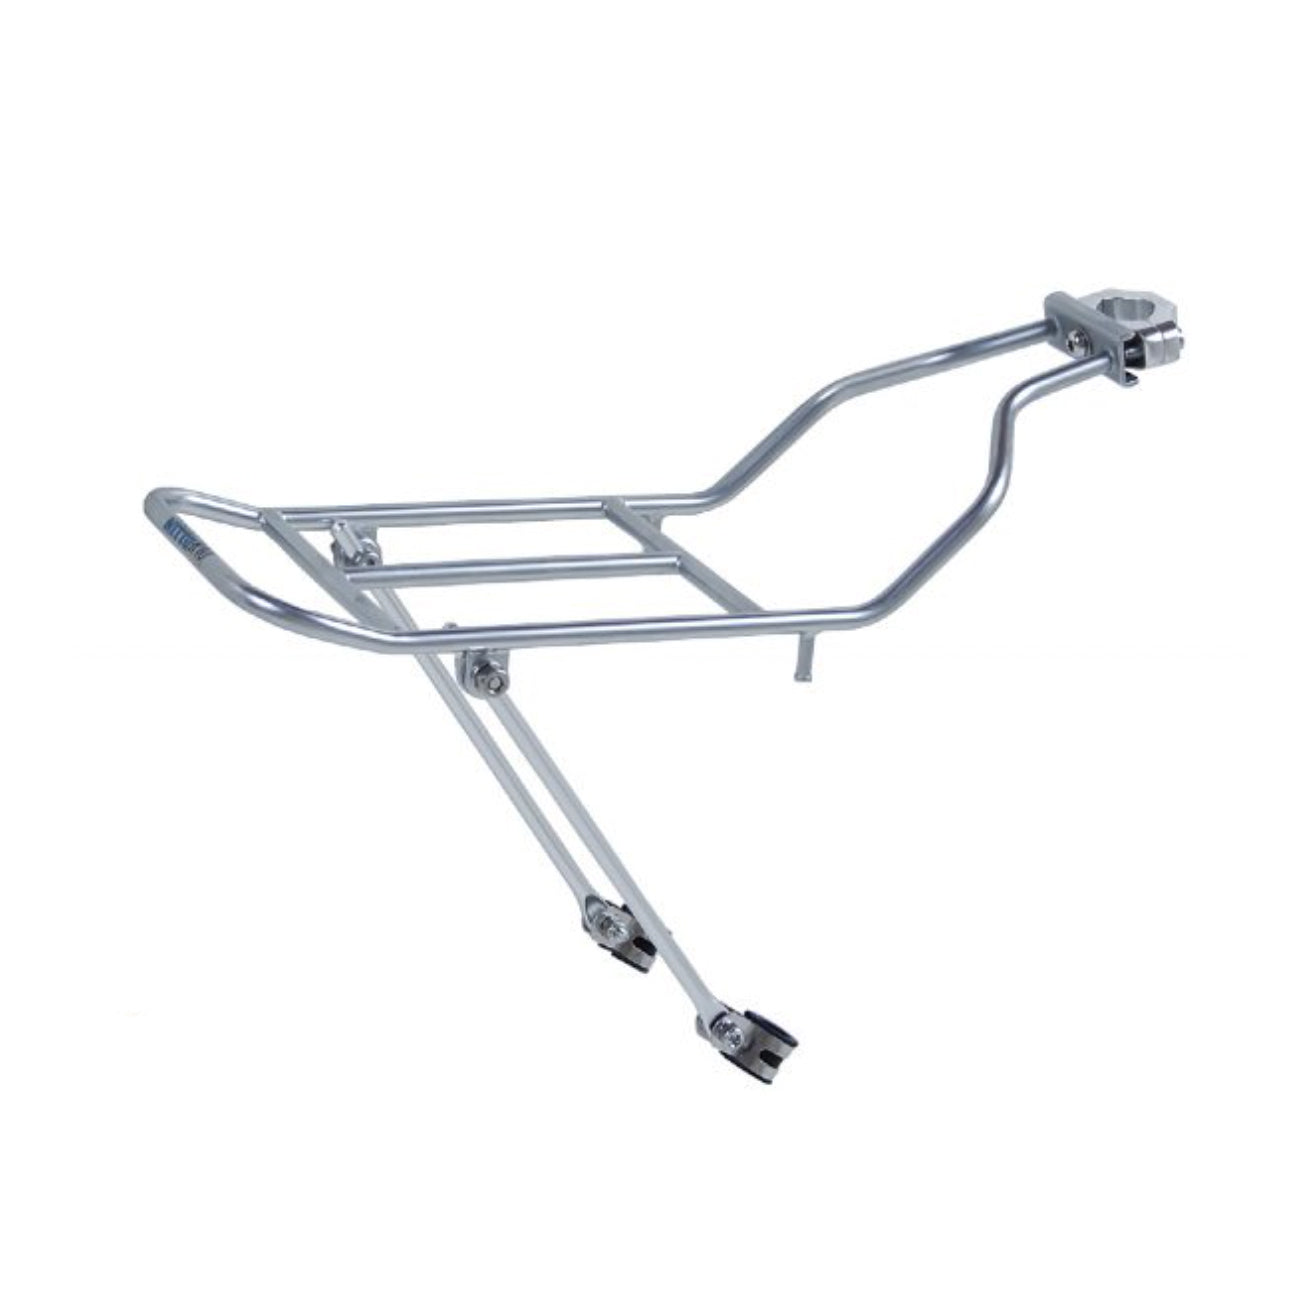 Nitto R-10 Rear Rack/Bag Support